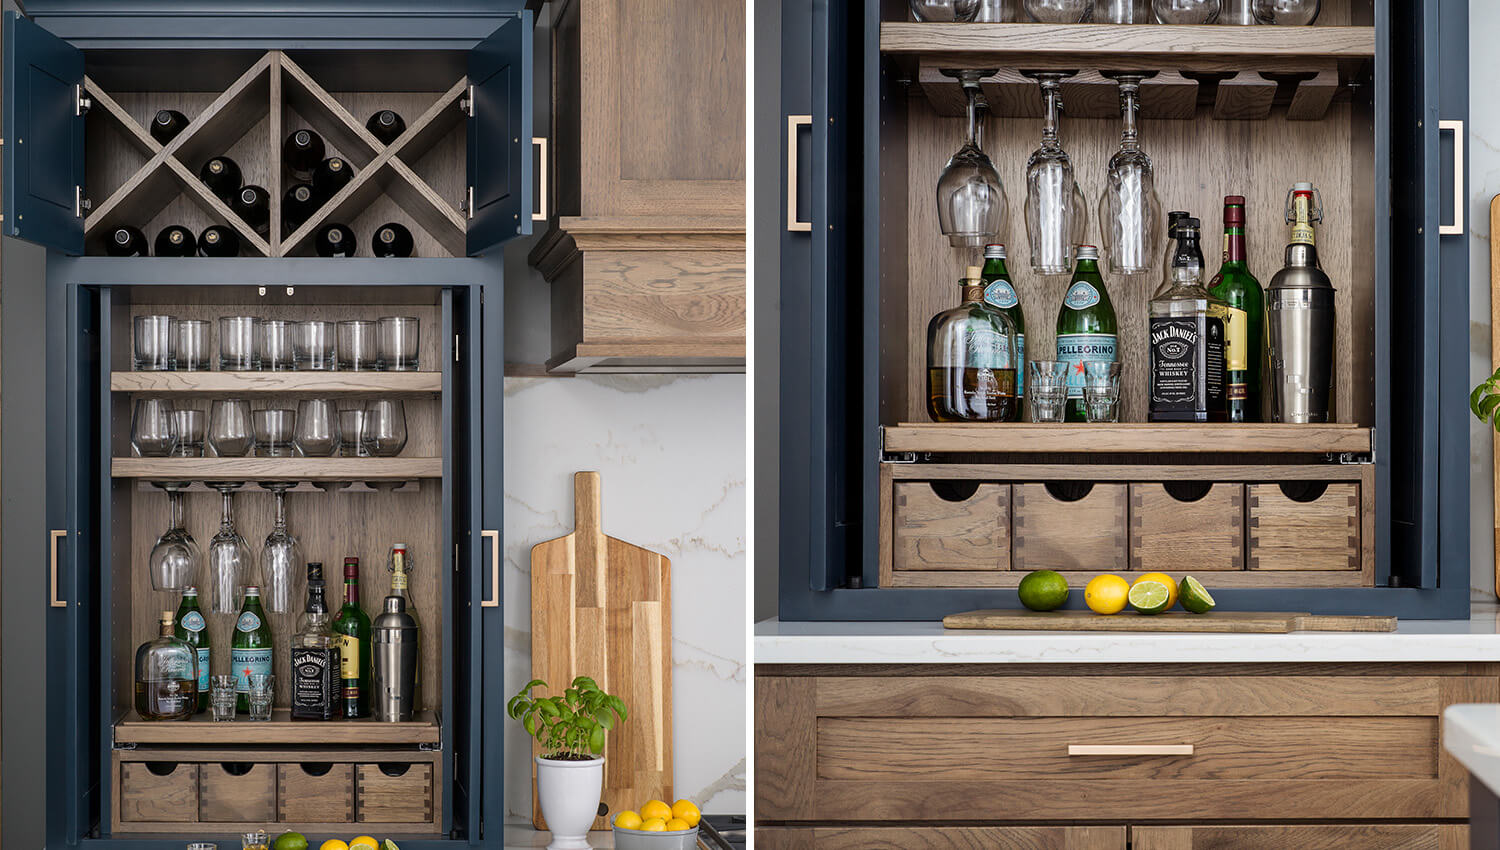 A Larder Liquor Cabinet with an X-wie Rack above, a wine glass rack, shelves for glassware, and small drawers for wine openers and bar tending supplies.